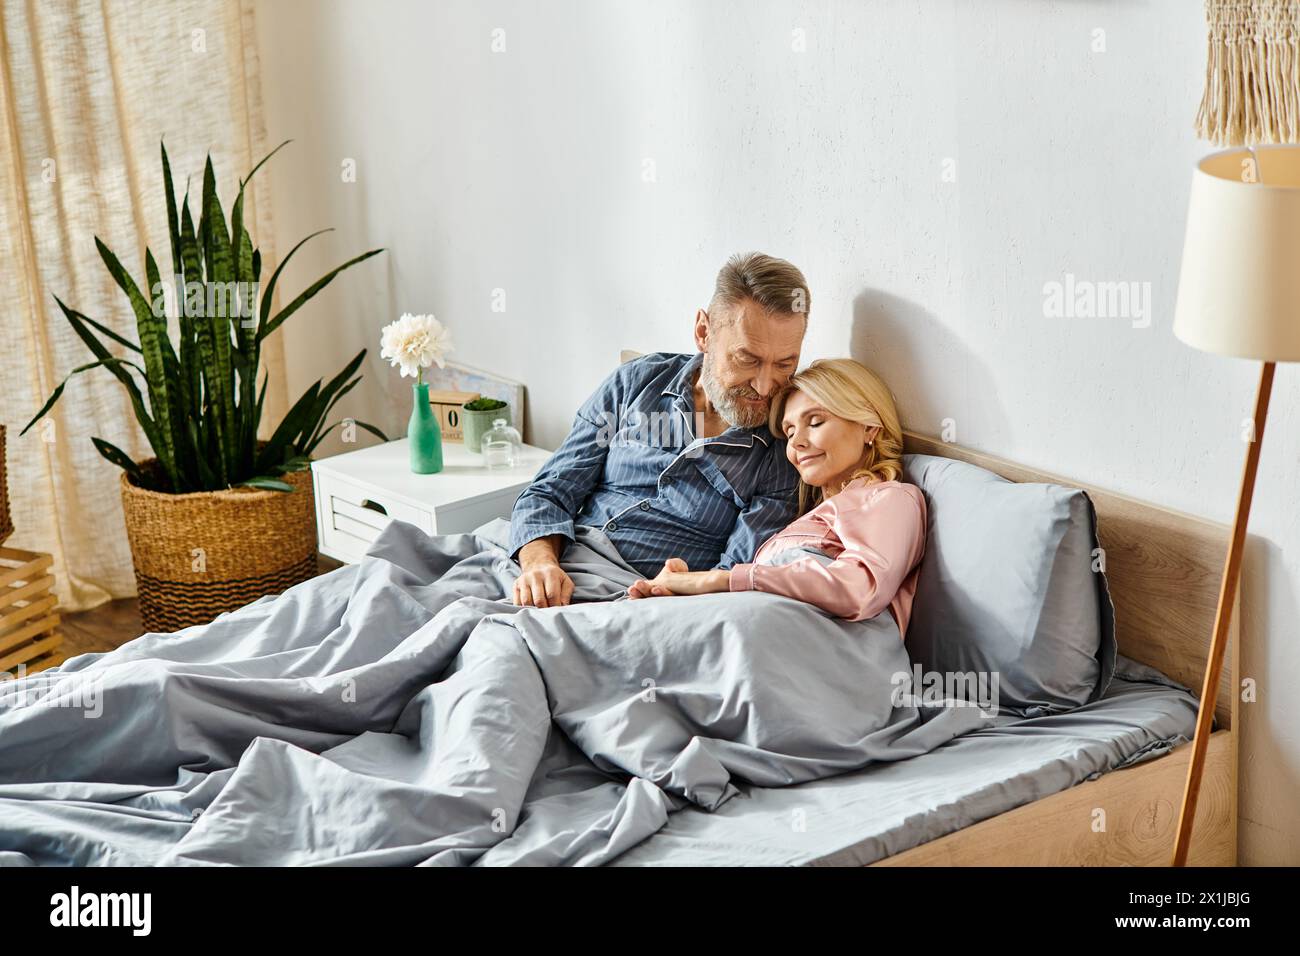 A man and woman, in cozy homewear, lovingly embrace while laying on a bed under a soft blanket in their bedroom. Stock Photo